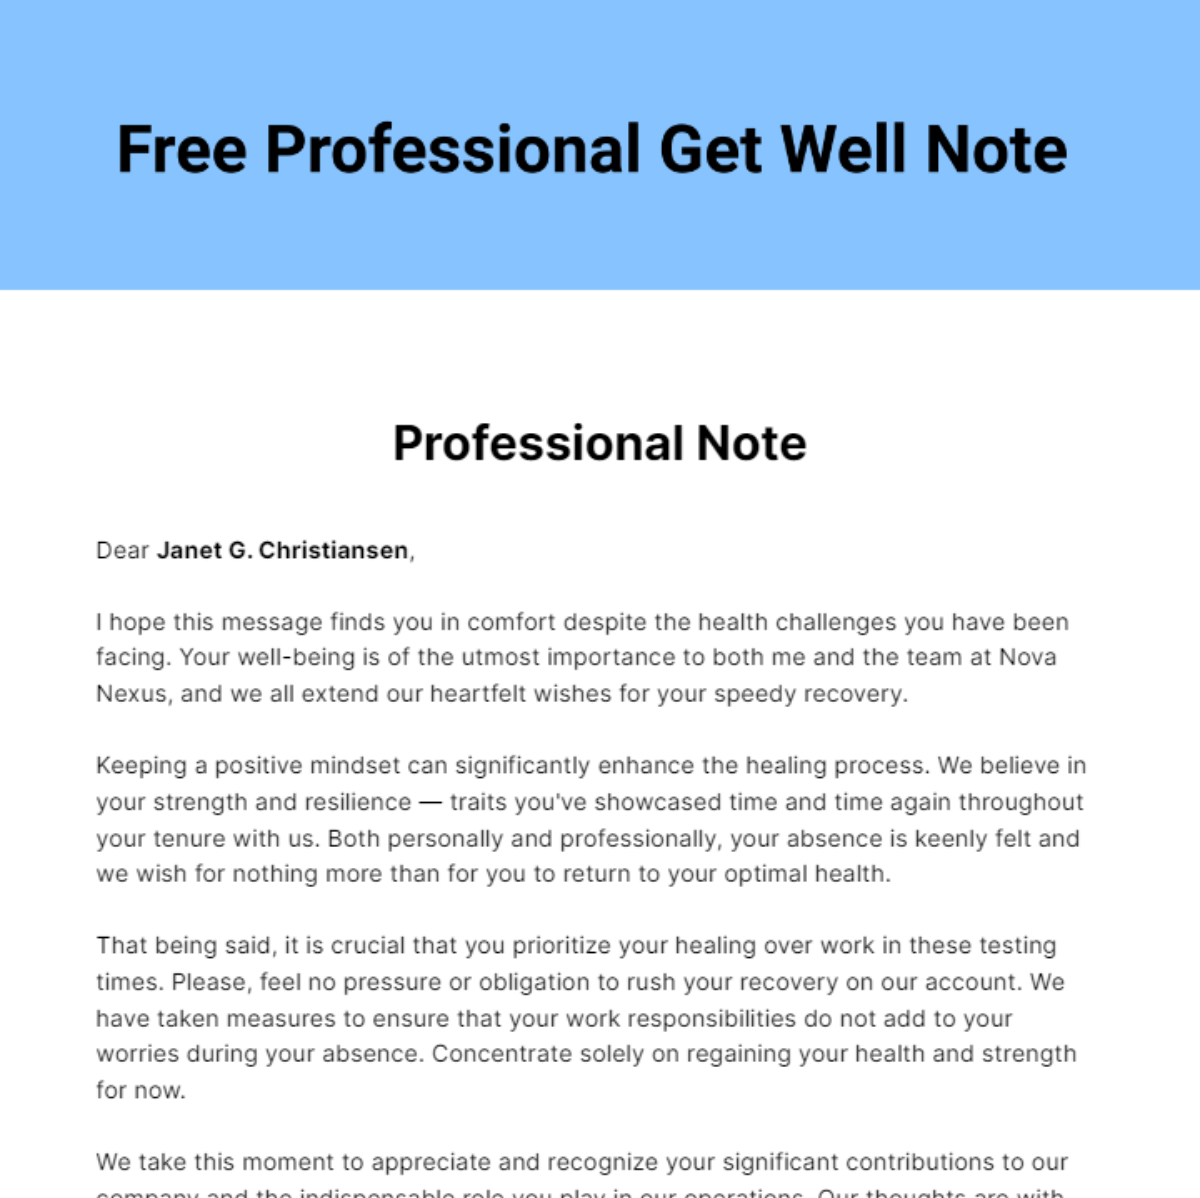 Free Professional Get Well Note Template